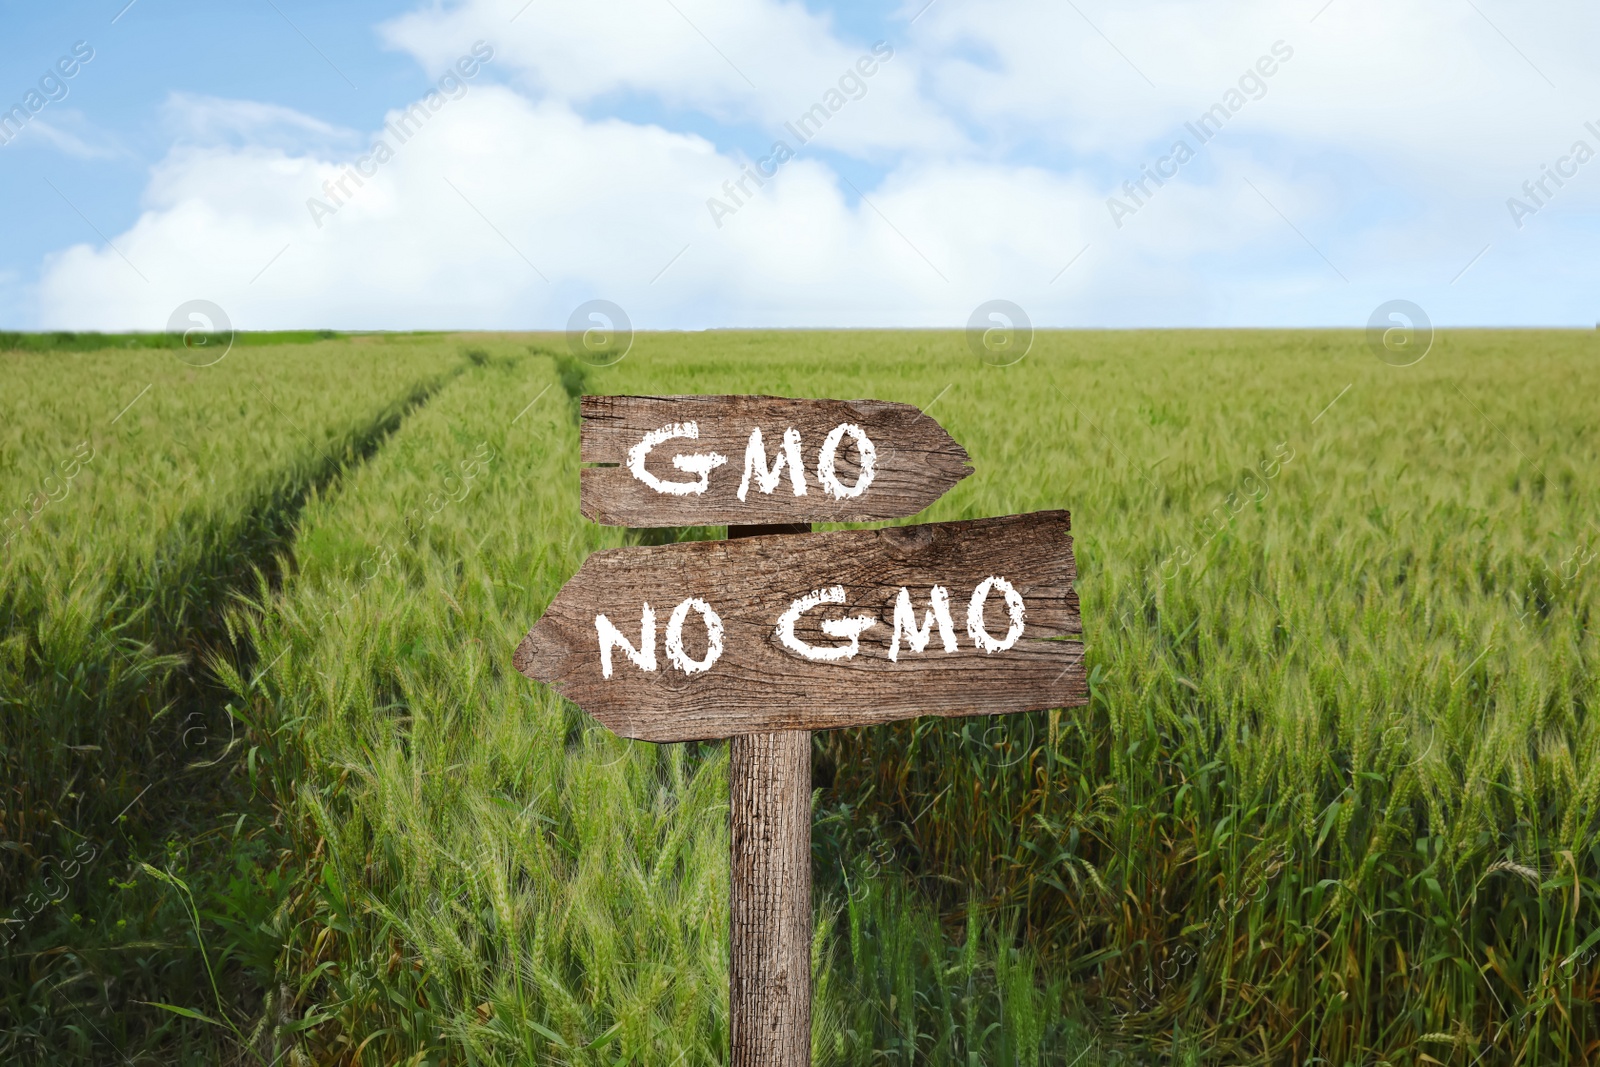 Image of Concept of GMO. Wooden sign in field with ripening wheat